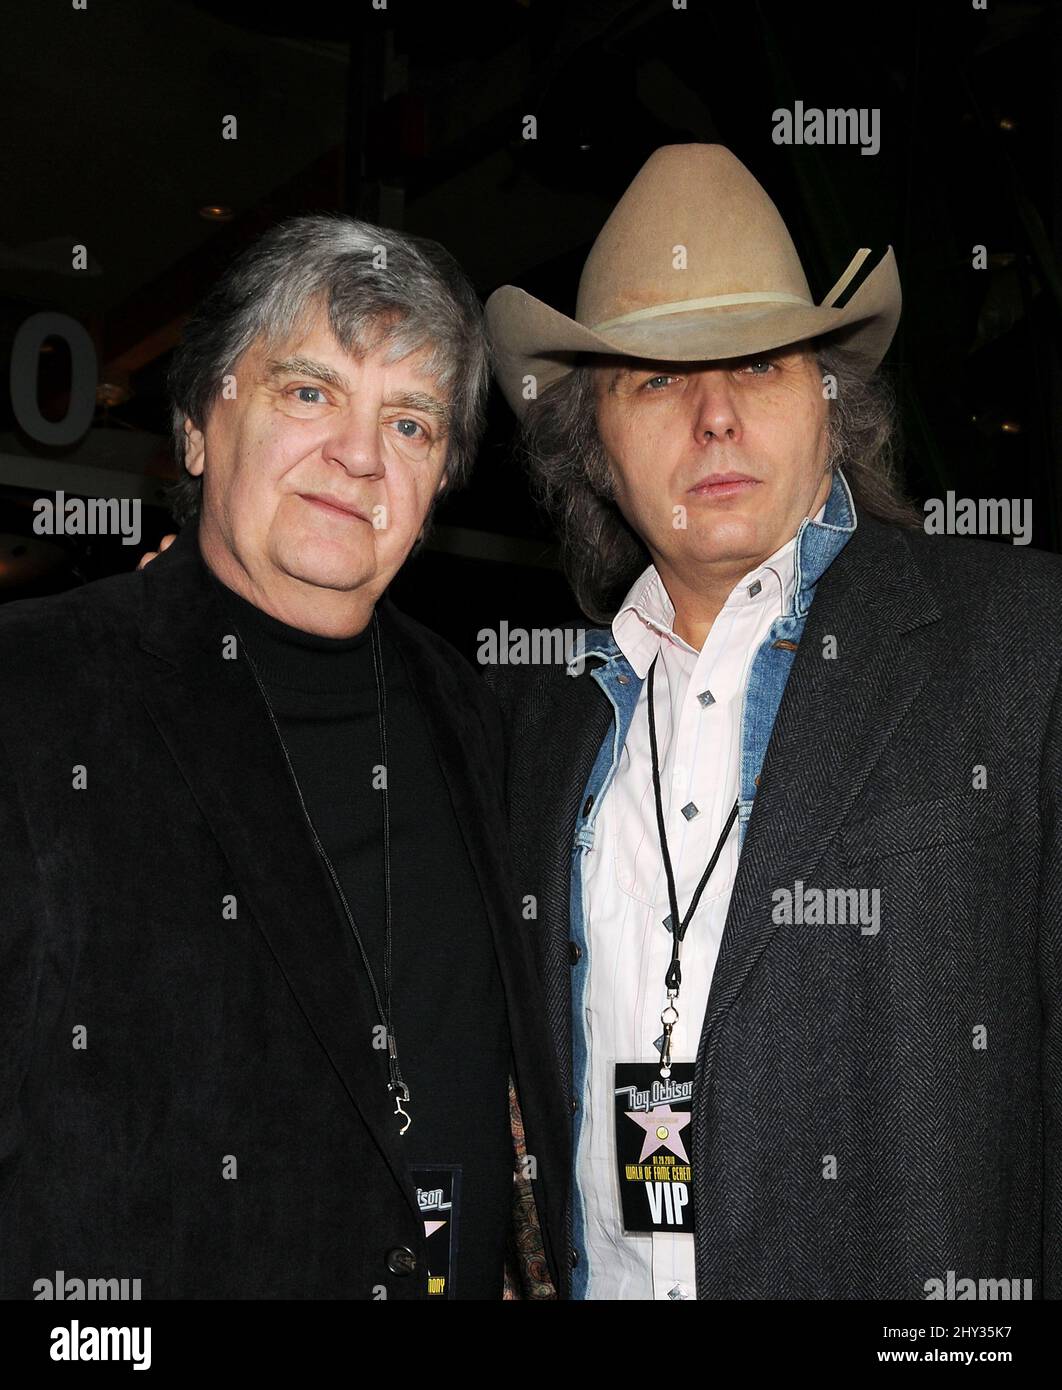 Phil Everly (left) and Dwight Yoakam at the event as Roy Orbison is Honored Posthumously with a Star on the Hollywood Walk of Fame Stock Photo